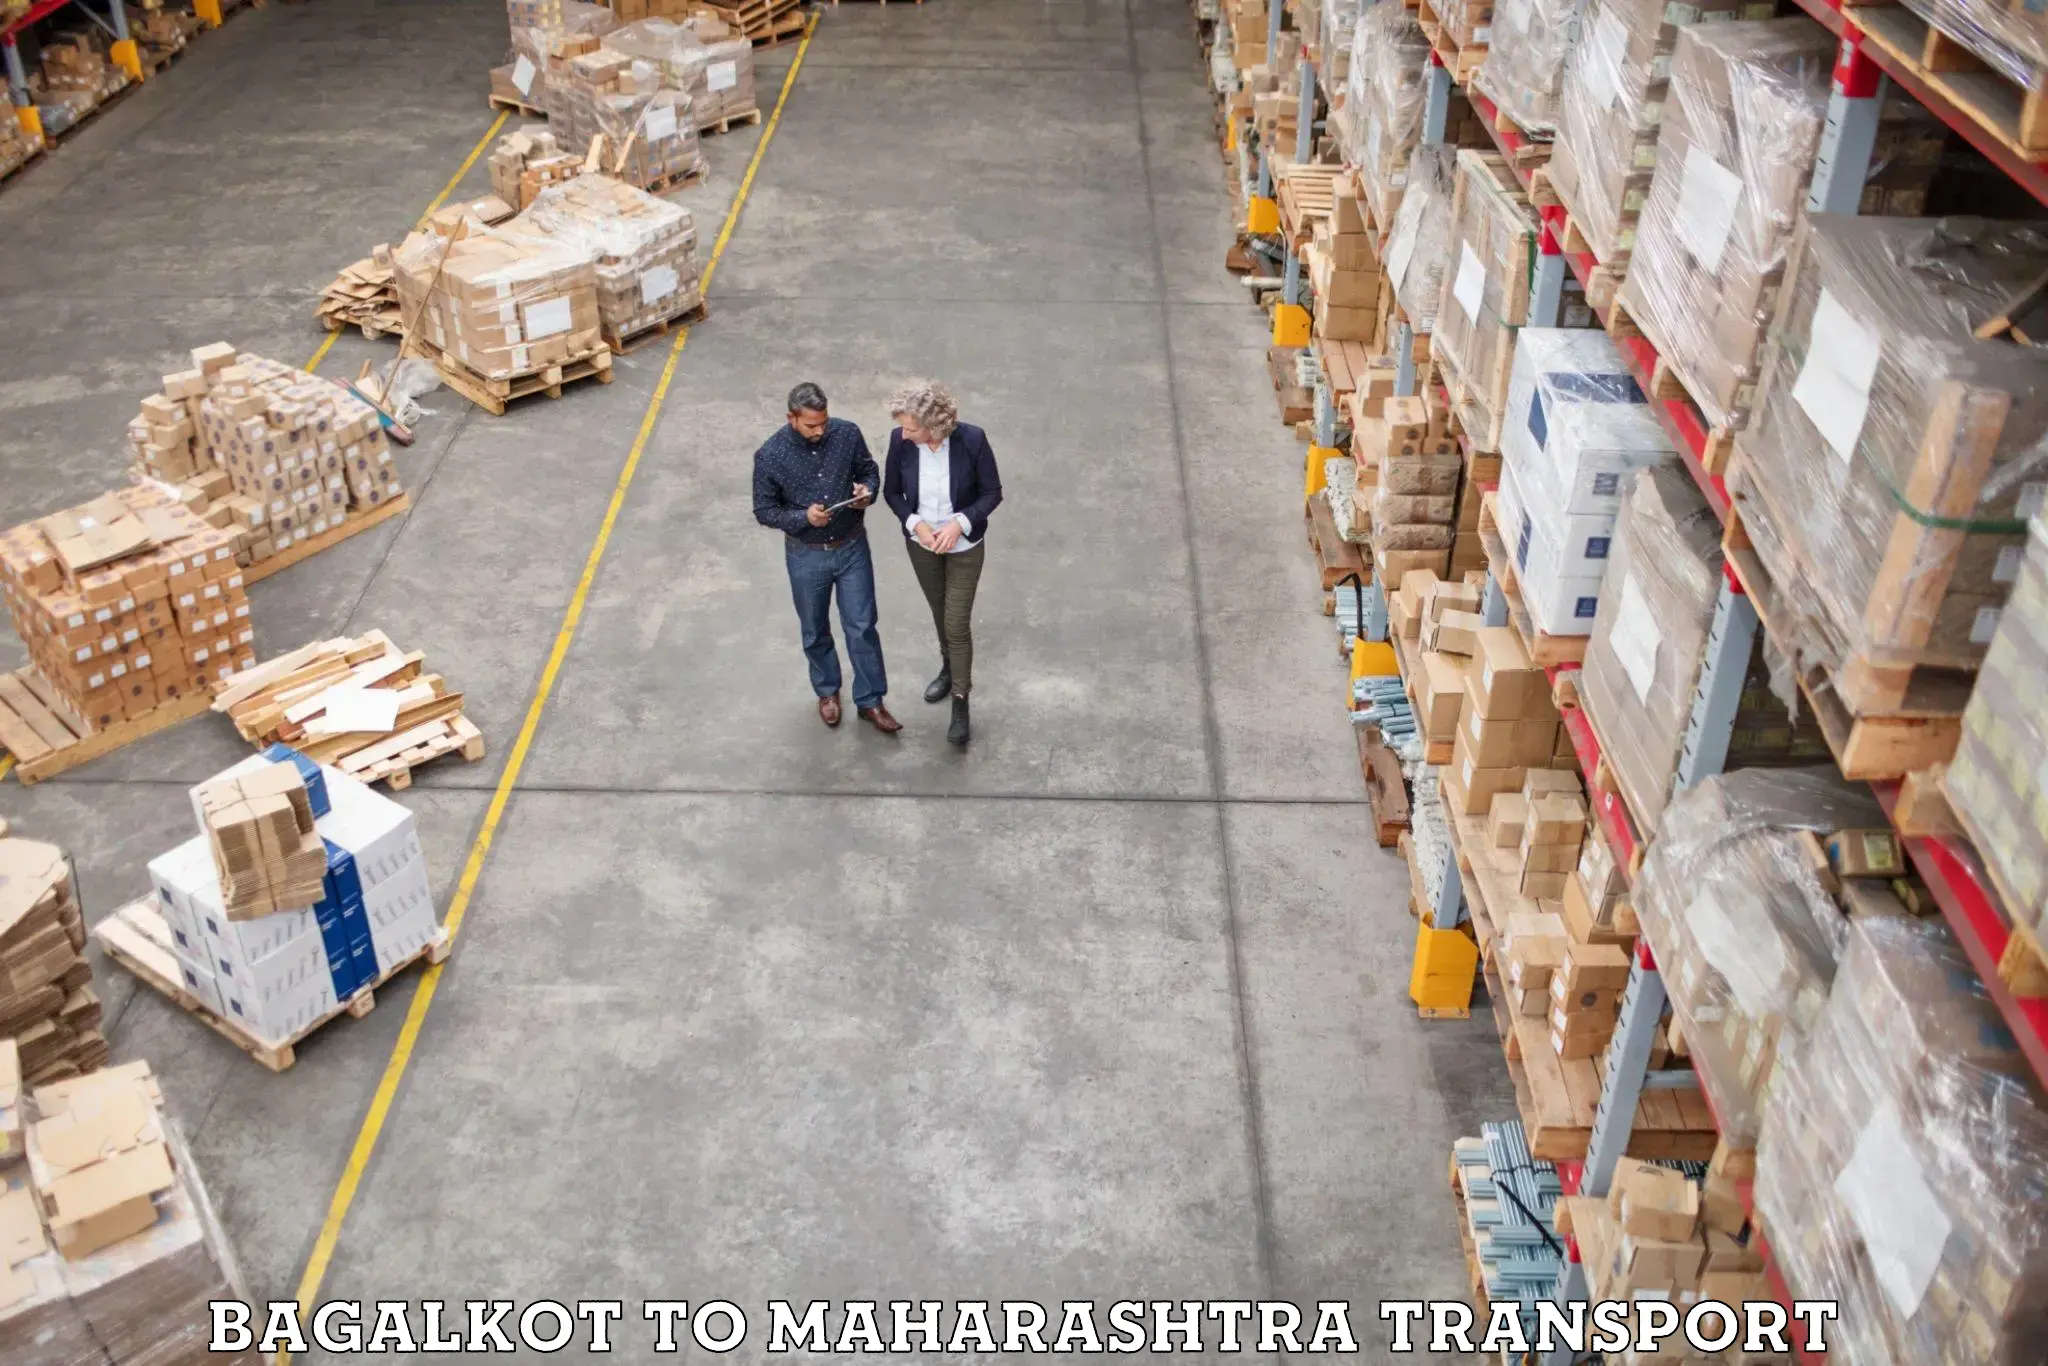 Truck transport companies in India Bagalkot to Solapur